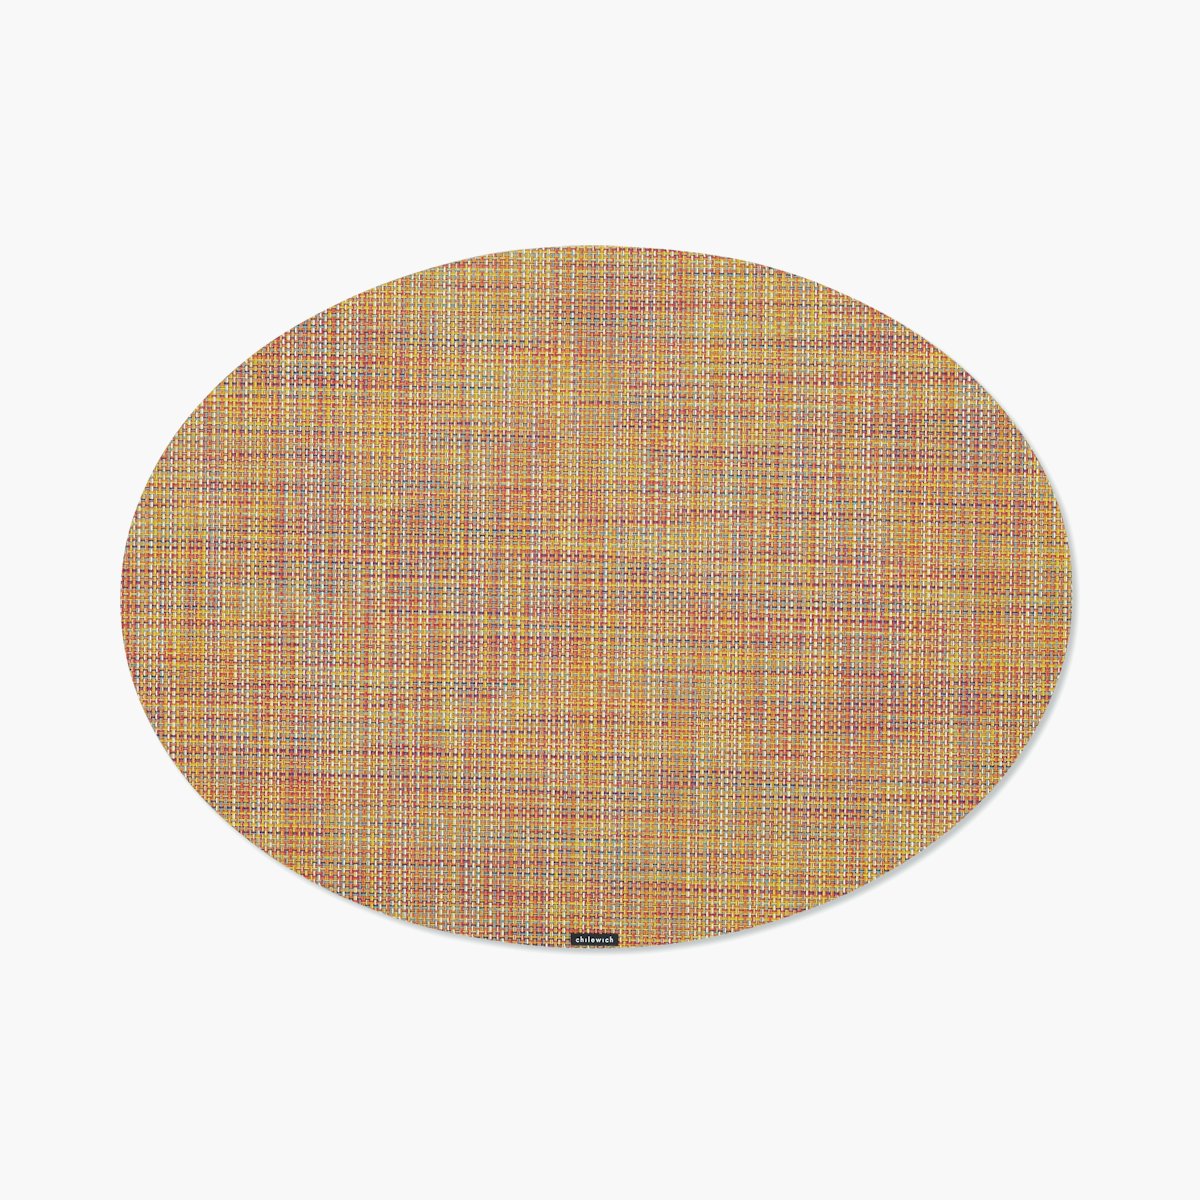 Chilewich Mini Basketweave Oval Placemats